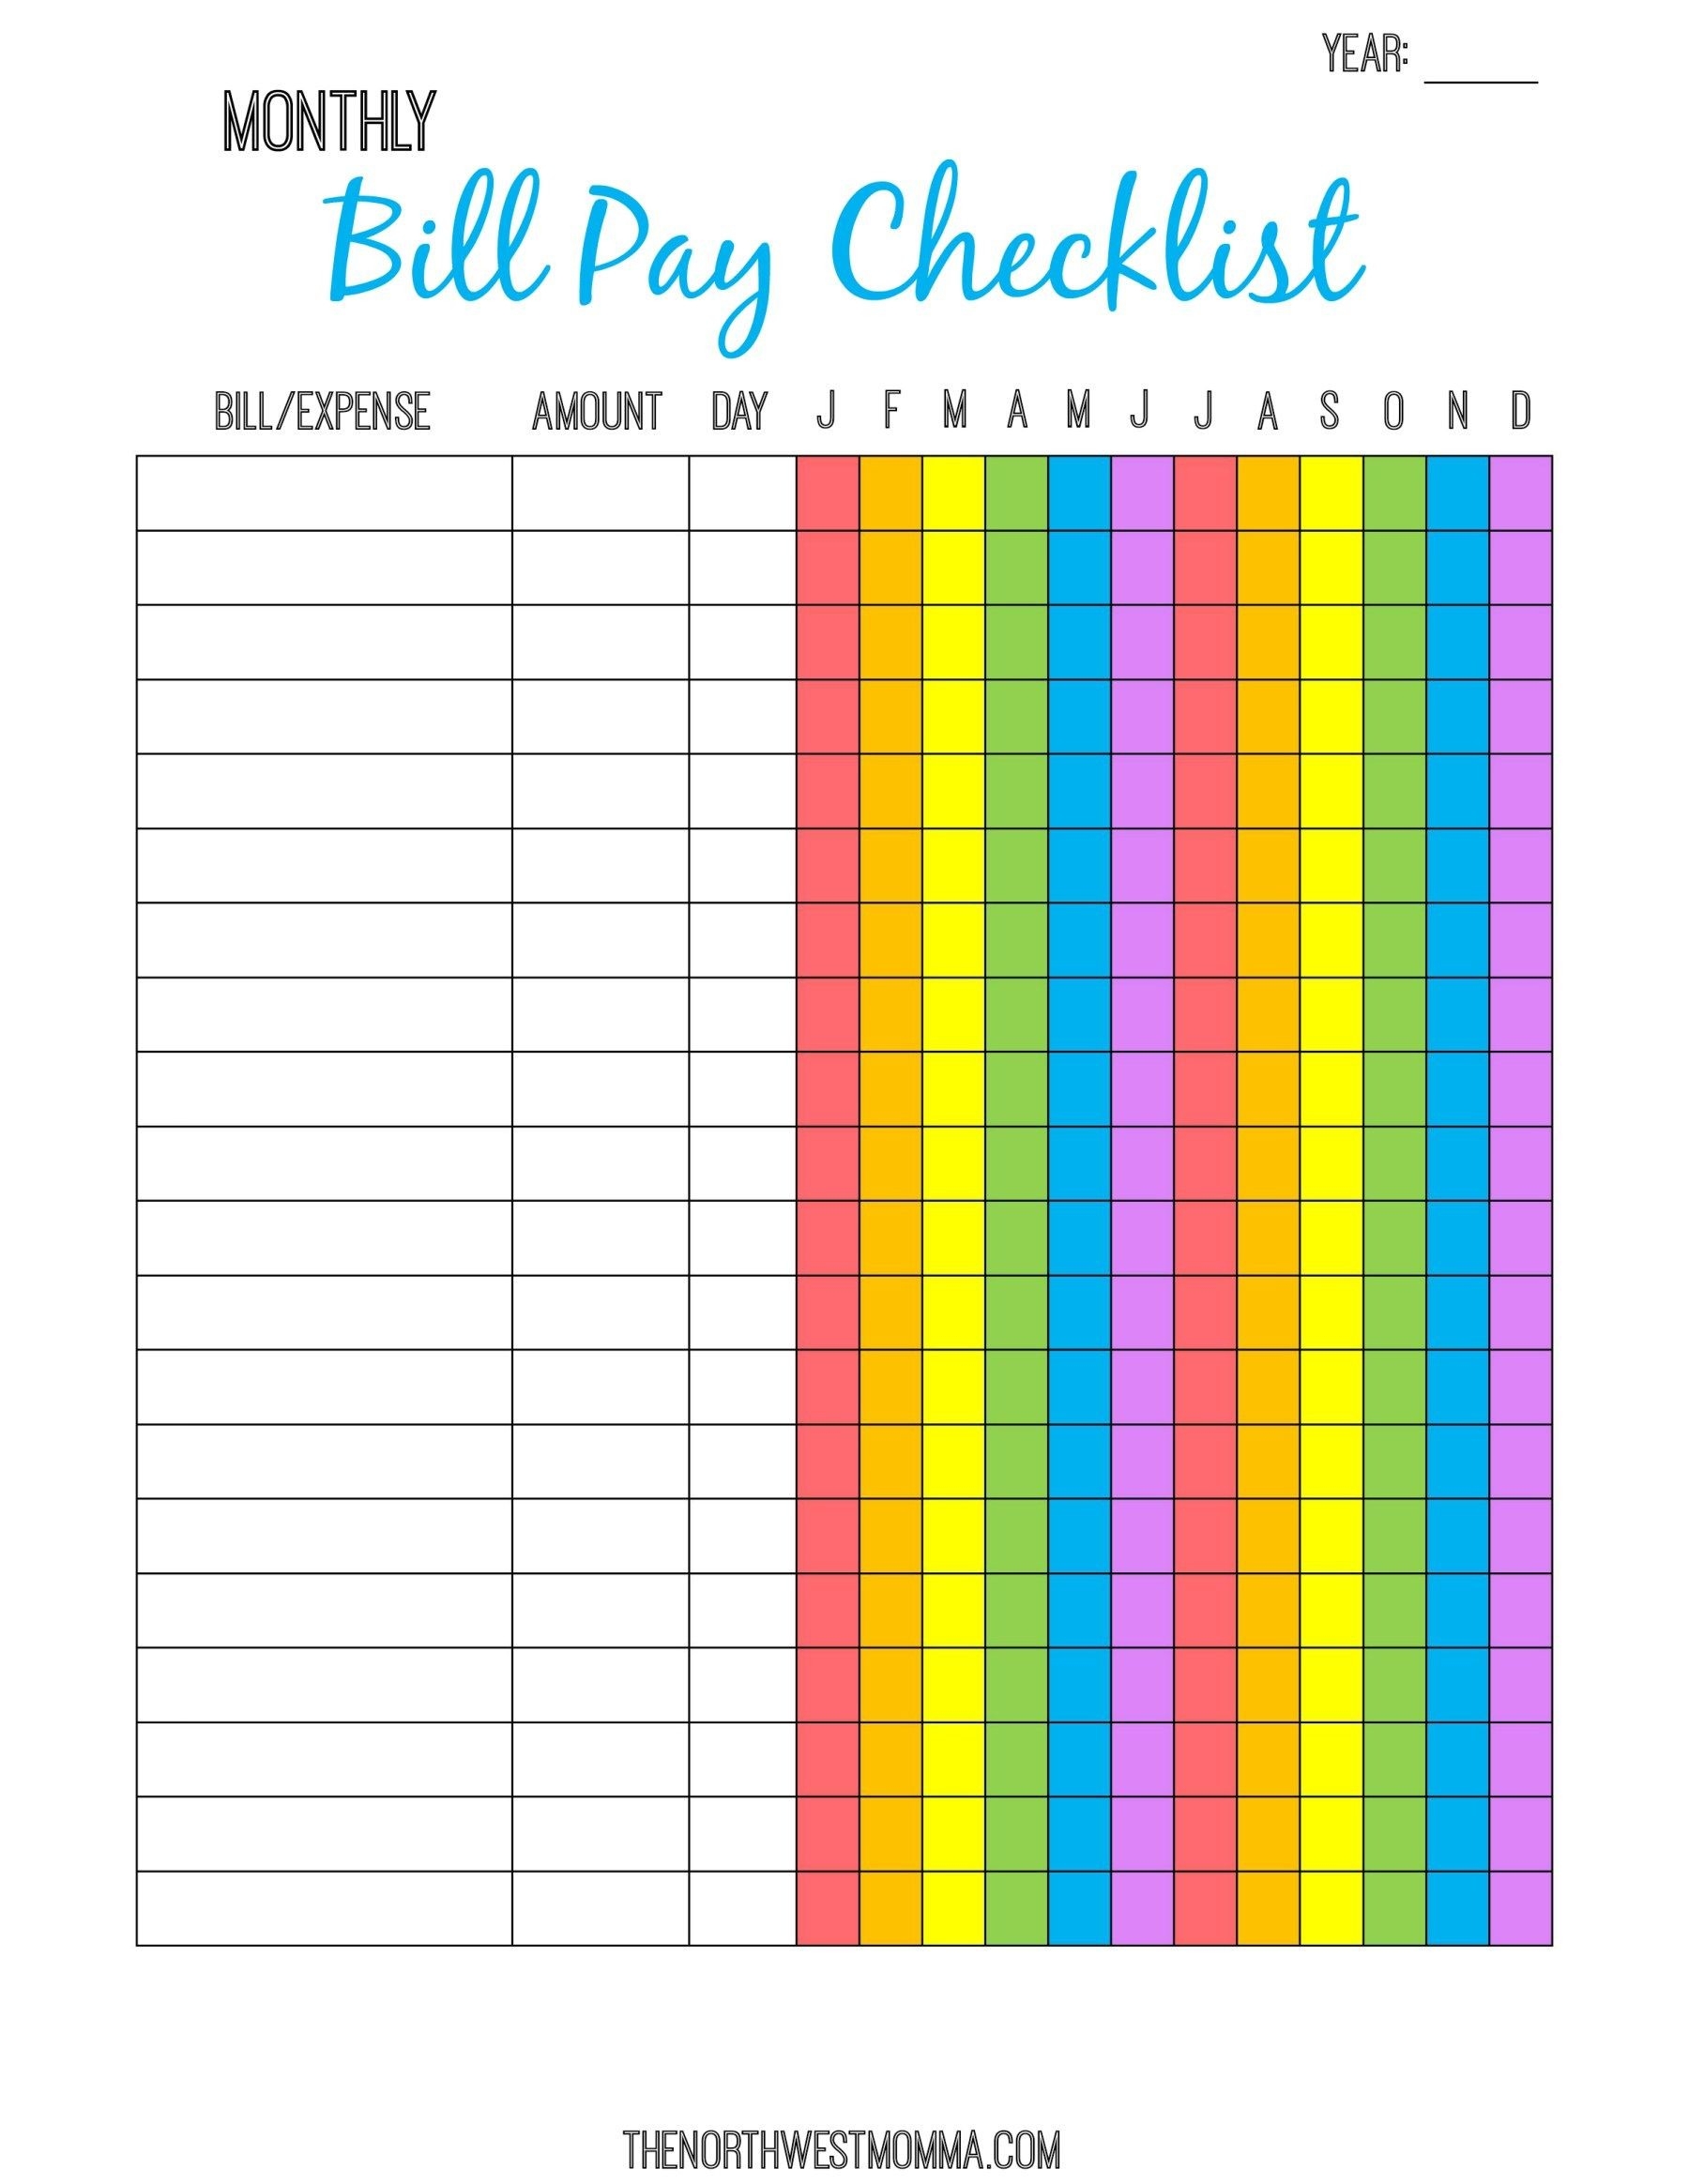 Monthly Bill Pay Checklist- Free Printable! | Organizing  Bill Payment Sheet